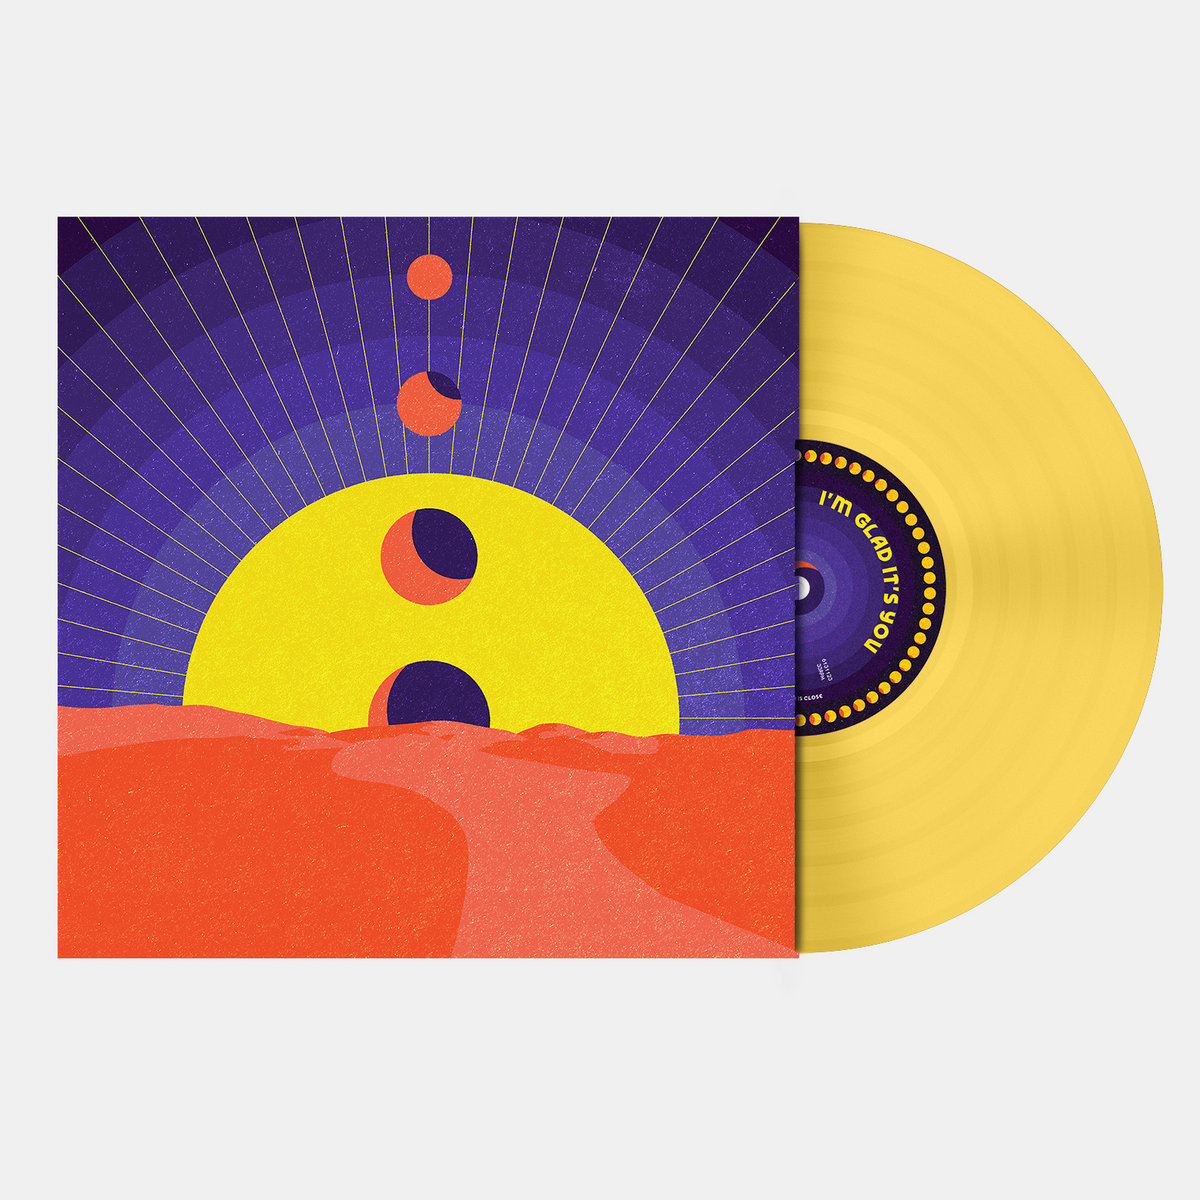 I'm Glad It's You "Every sun, every moon" LP